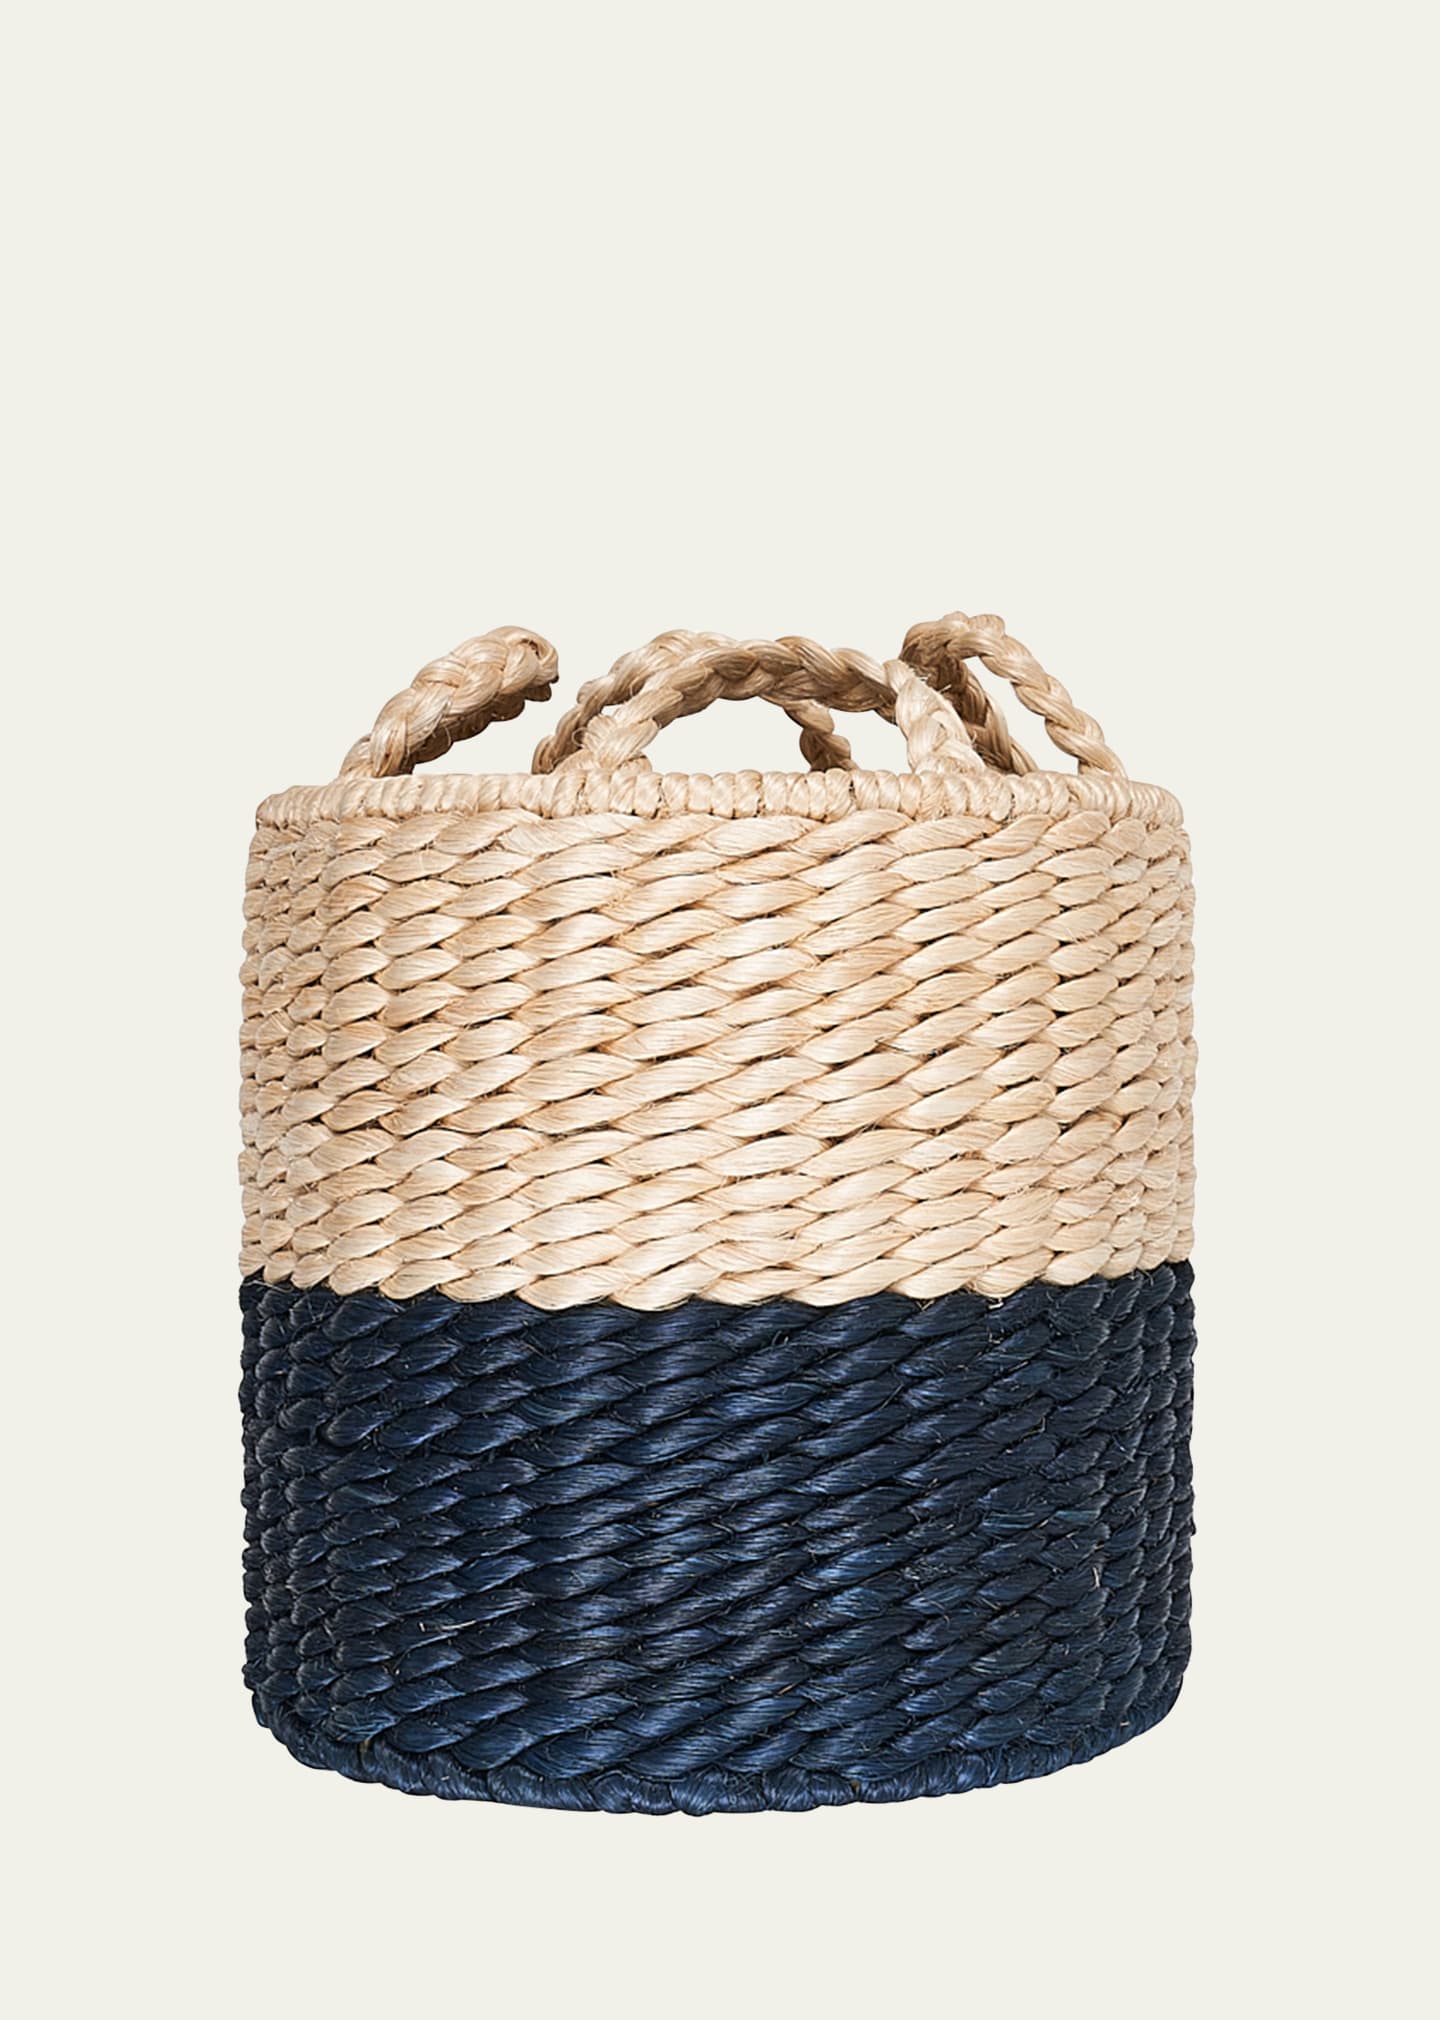 Schumacher Lubid Blue-dipped Abaca Basket, 20" In Blue Dipped